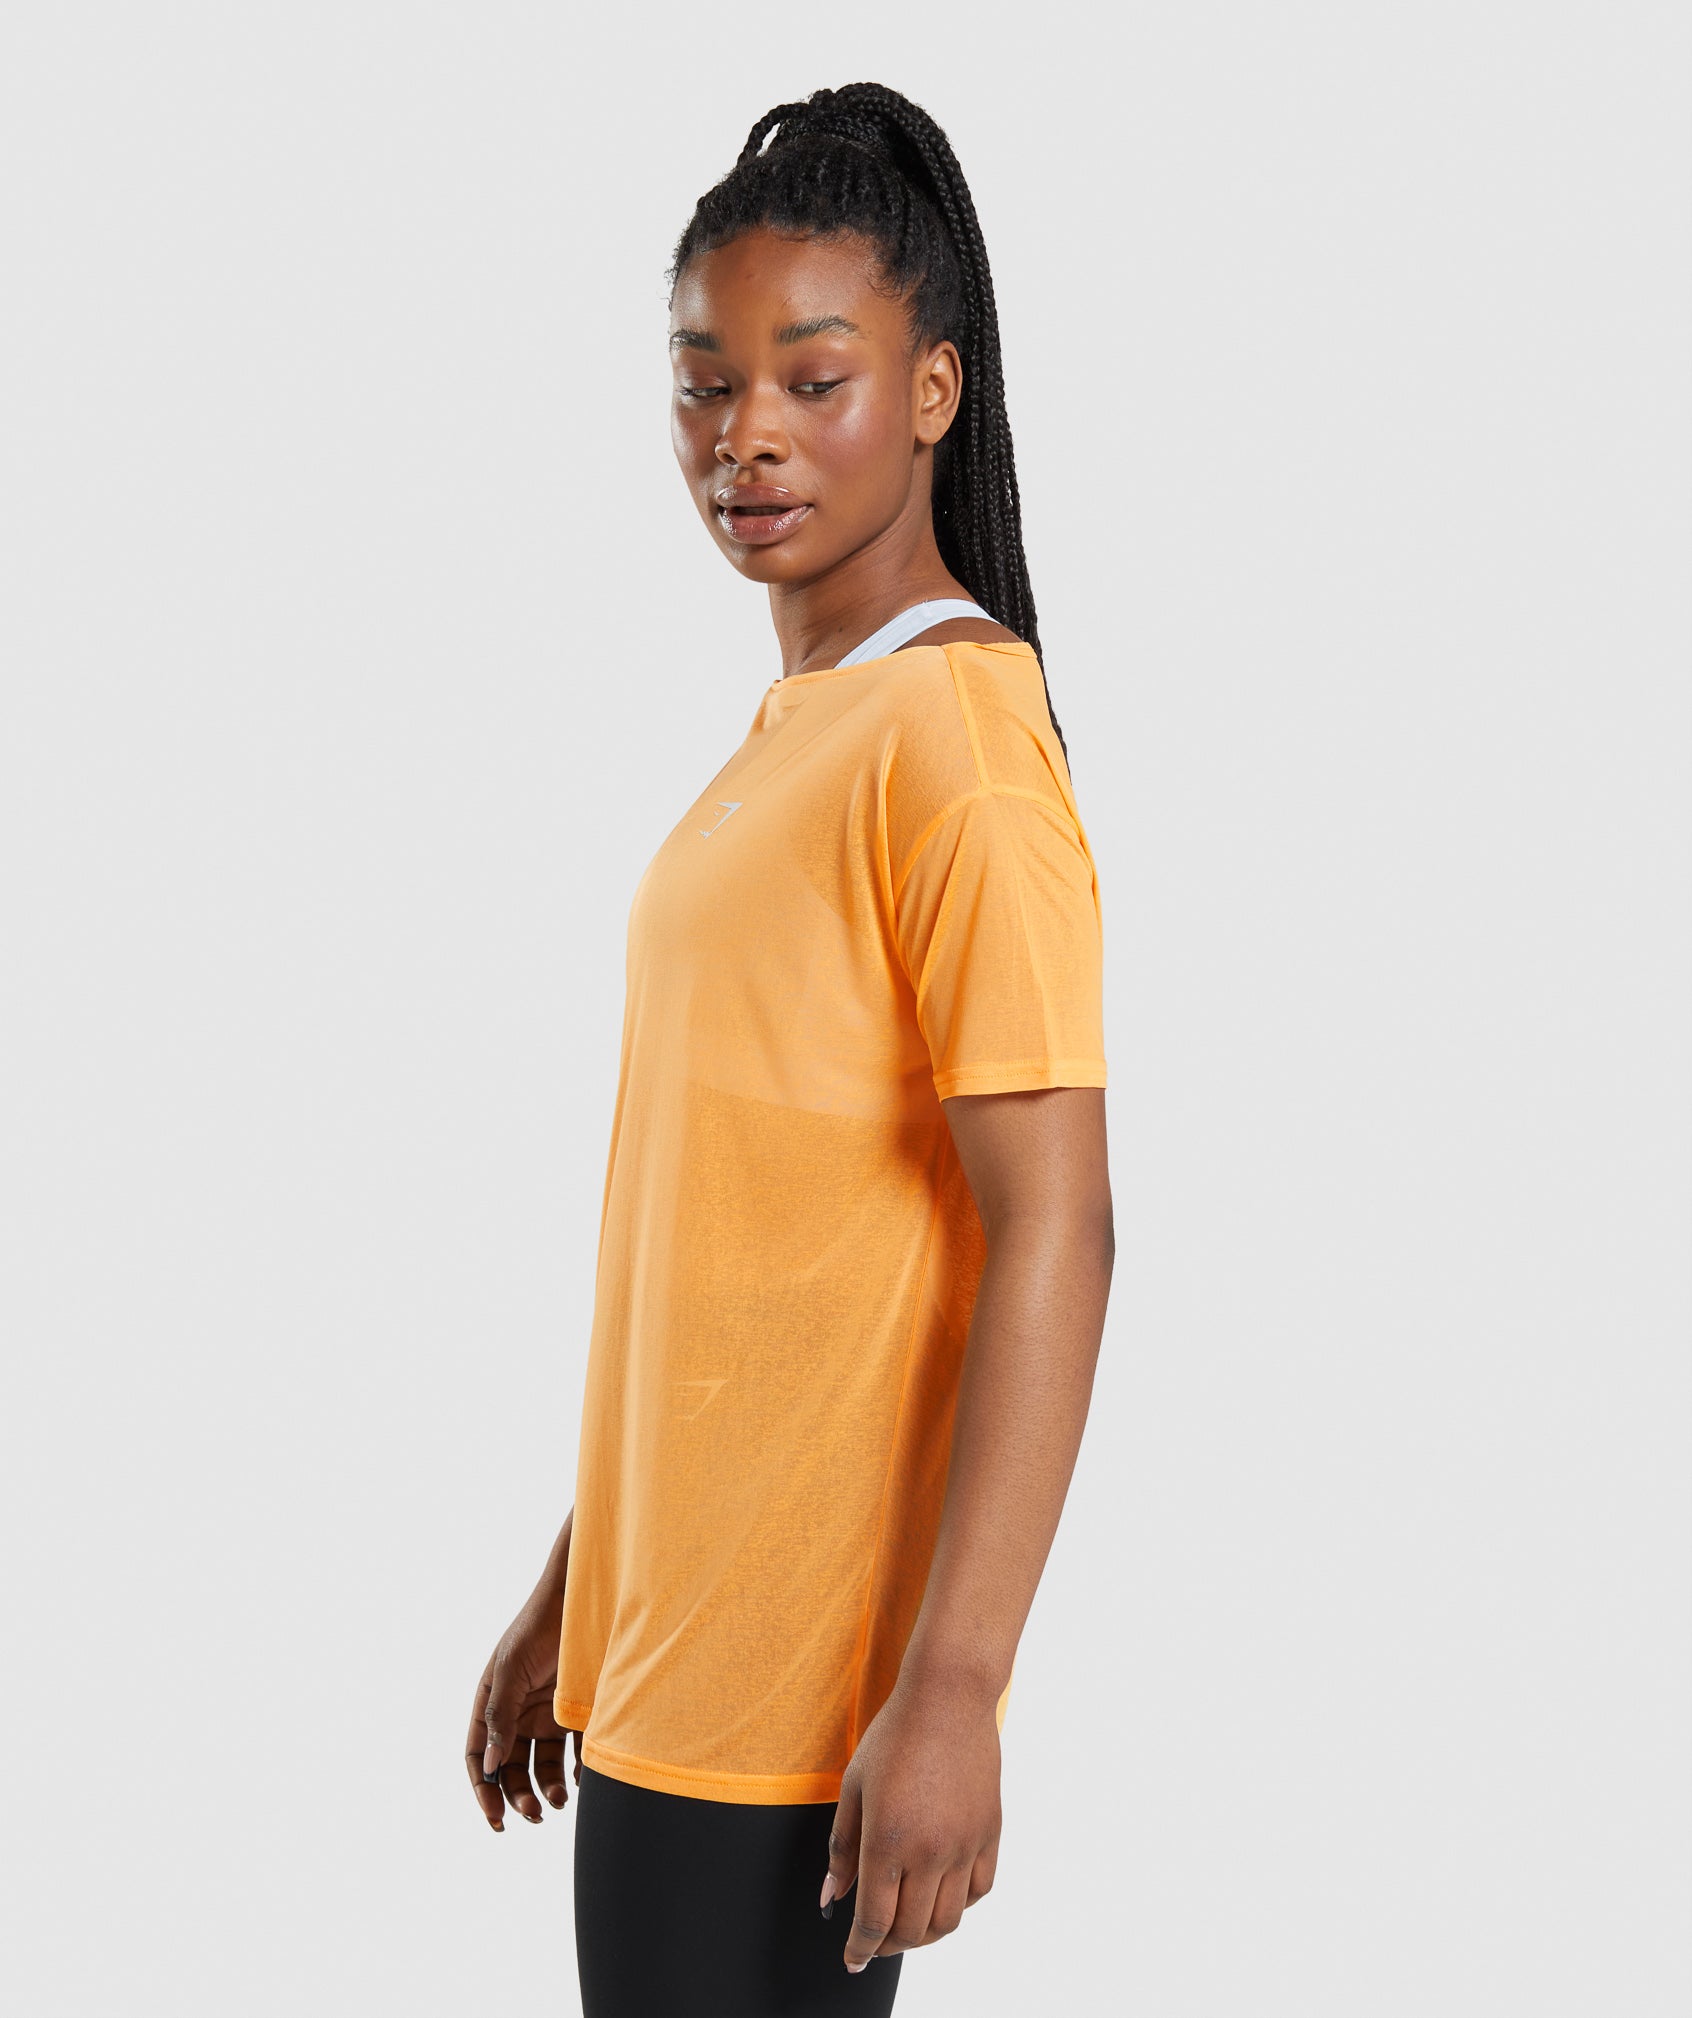 Training Oversized Top in Apricot Orange - view 3